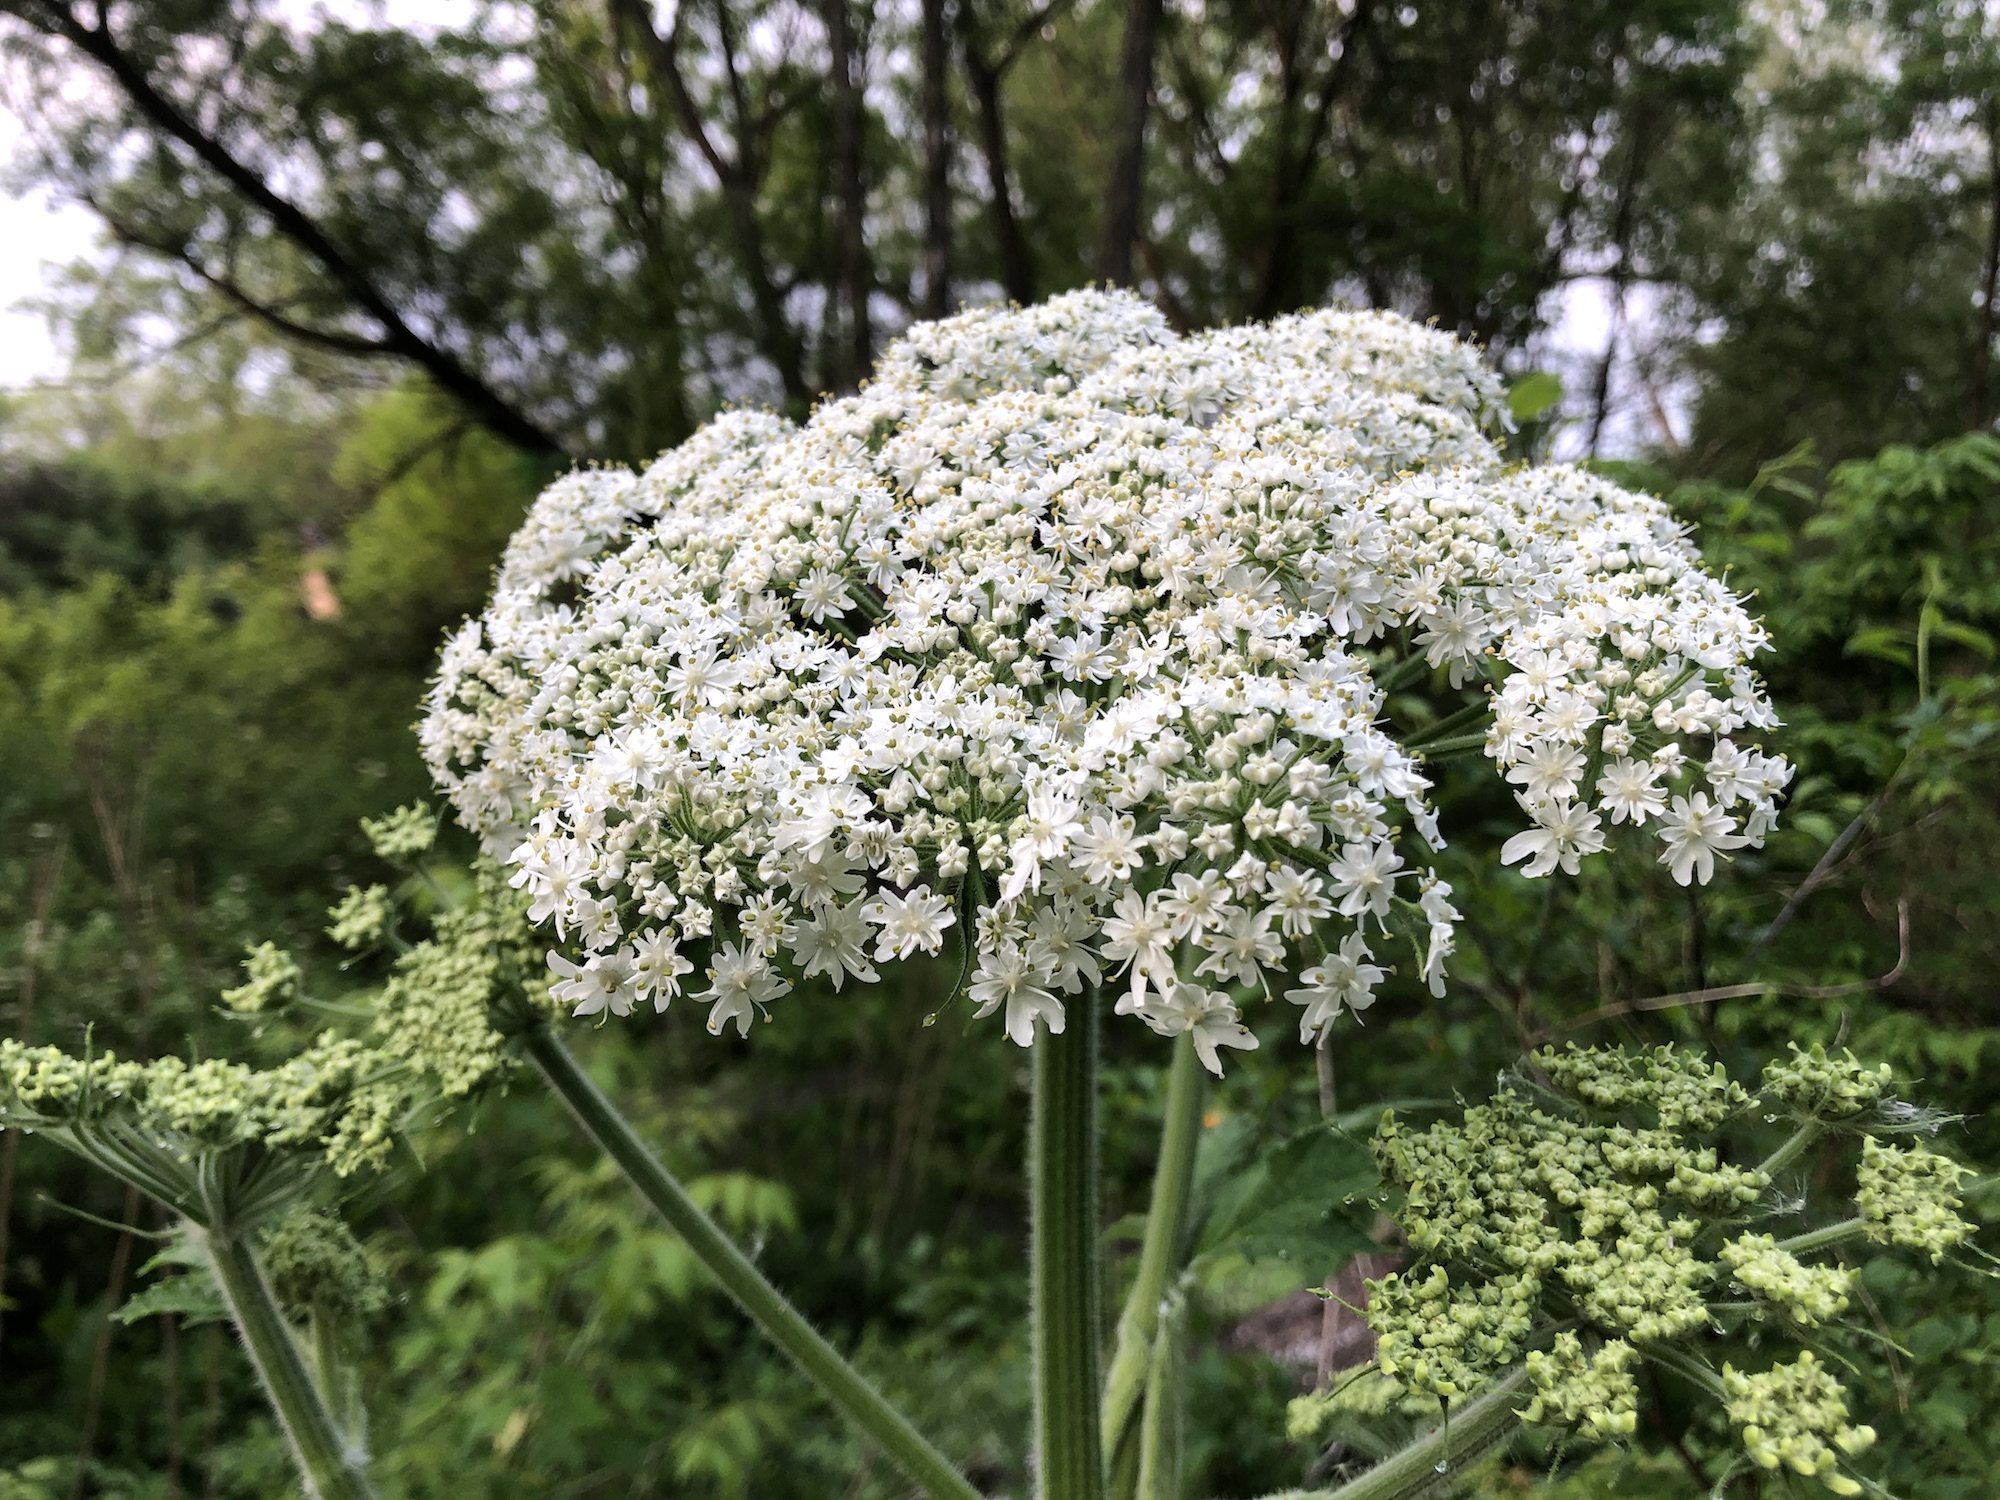  Cow Parsnip near Council Ring in Oak Savanna on May 31, 2019 in Madison, Wisconsin.